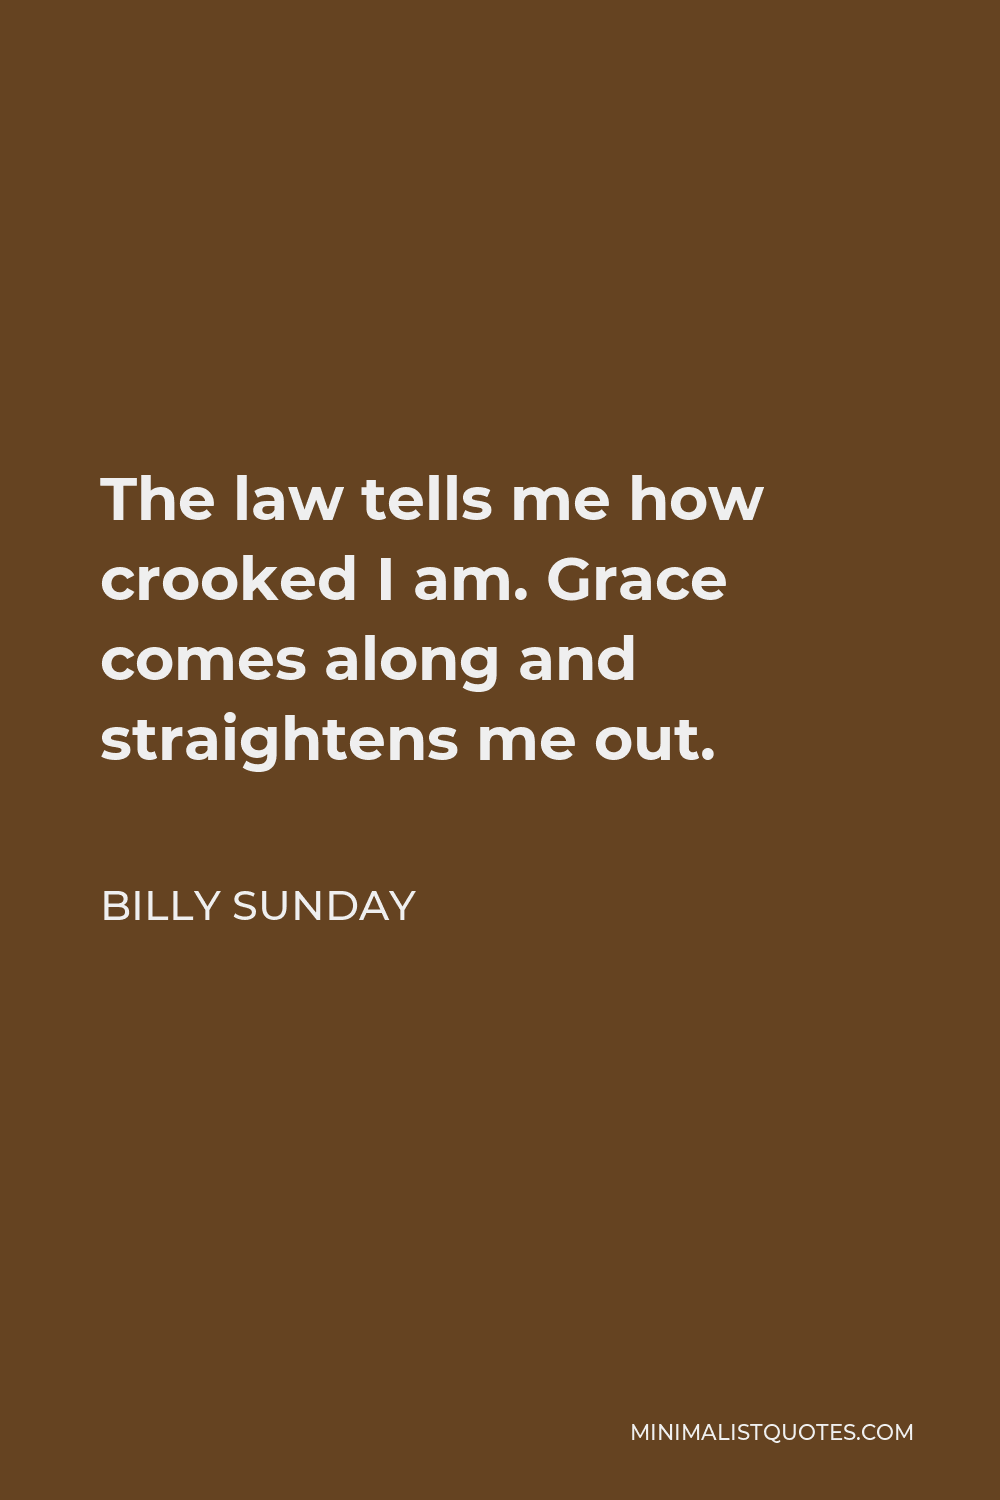 Billy Sunday Quote - The law tells me how crooked I am. Grace comes along and straightens me out.